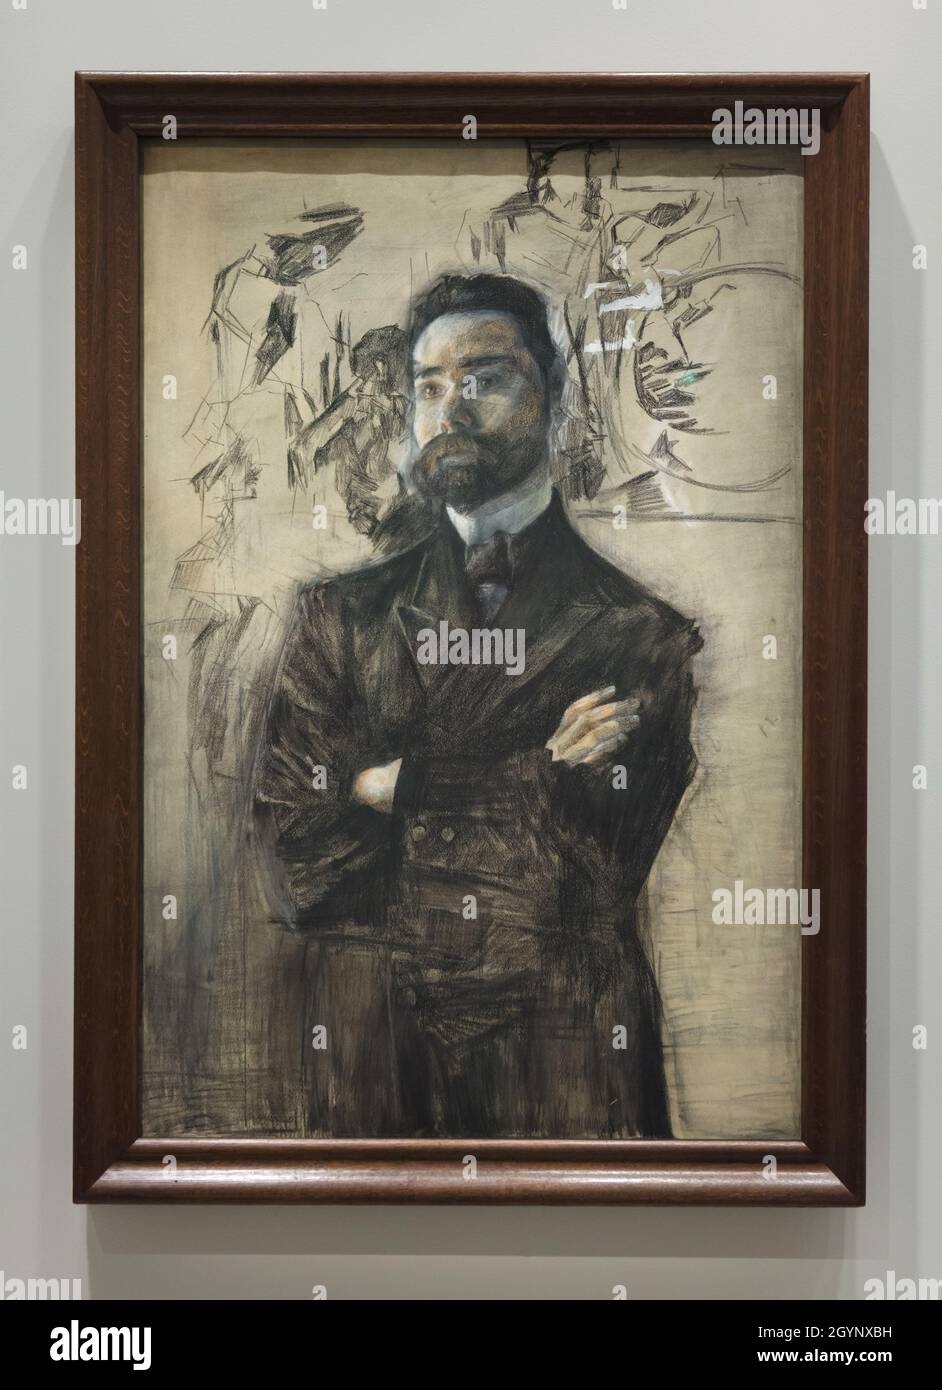 Coal and chalk drawing 'Portrait of Poet Valery Bryusov' by Russian modernist artist Mikhail Vrubel (1906) on display at the exhibition 'Icons of Modern Art from the Morozov Collection' in the Fondation Louis Vuitton in Paris, France. The exhibition runs till 22 February 2022. Stock Photo